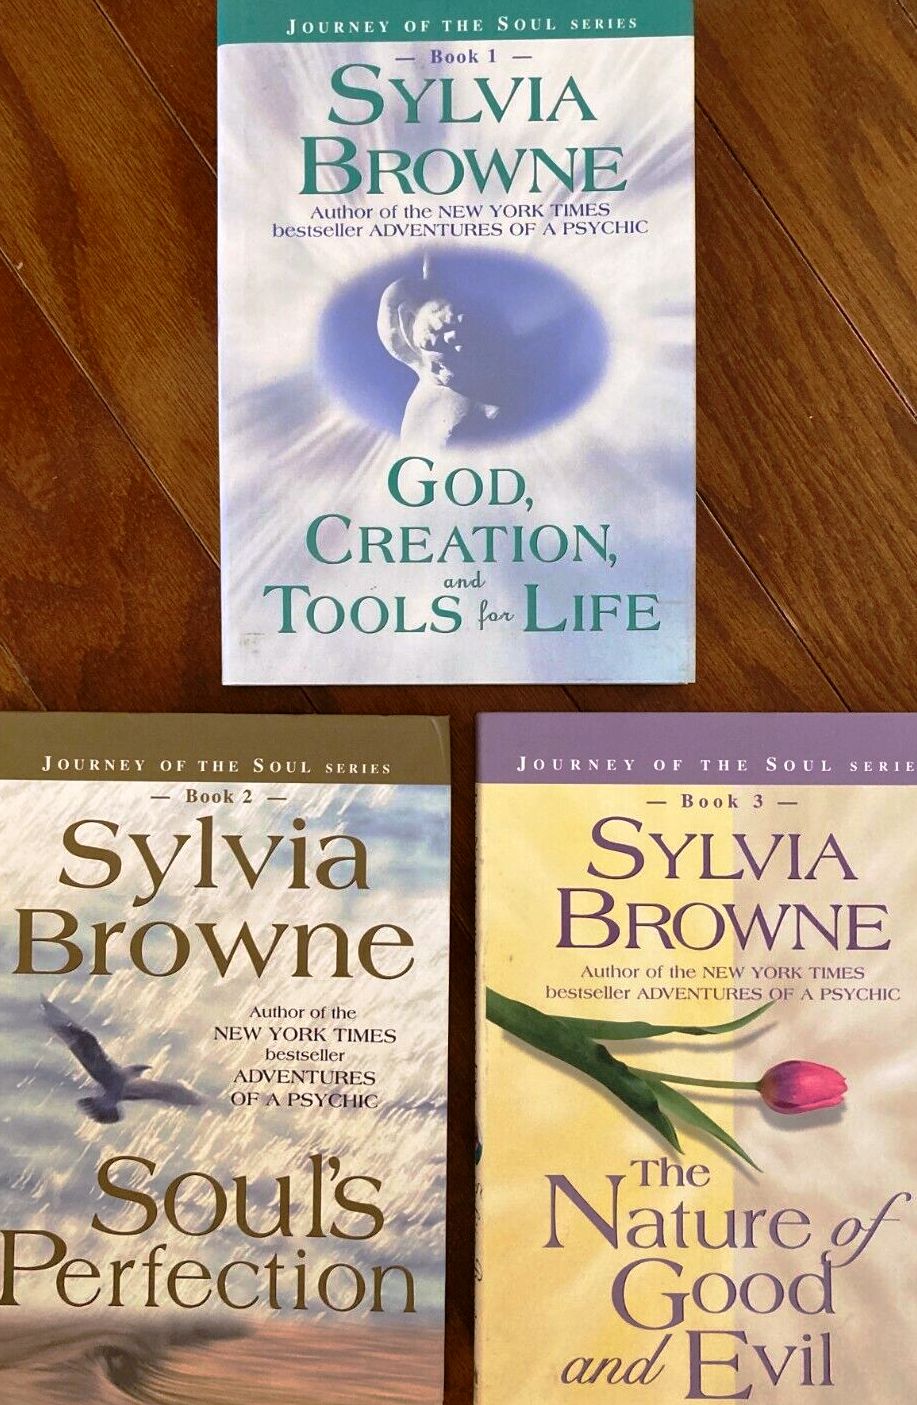 Journey of the Soul by Sylvia Browne